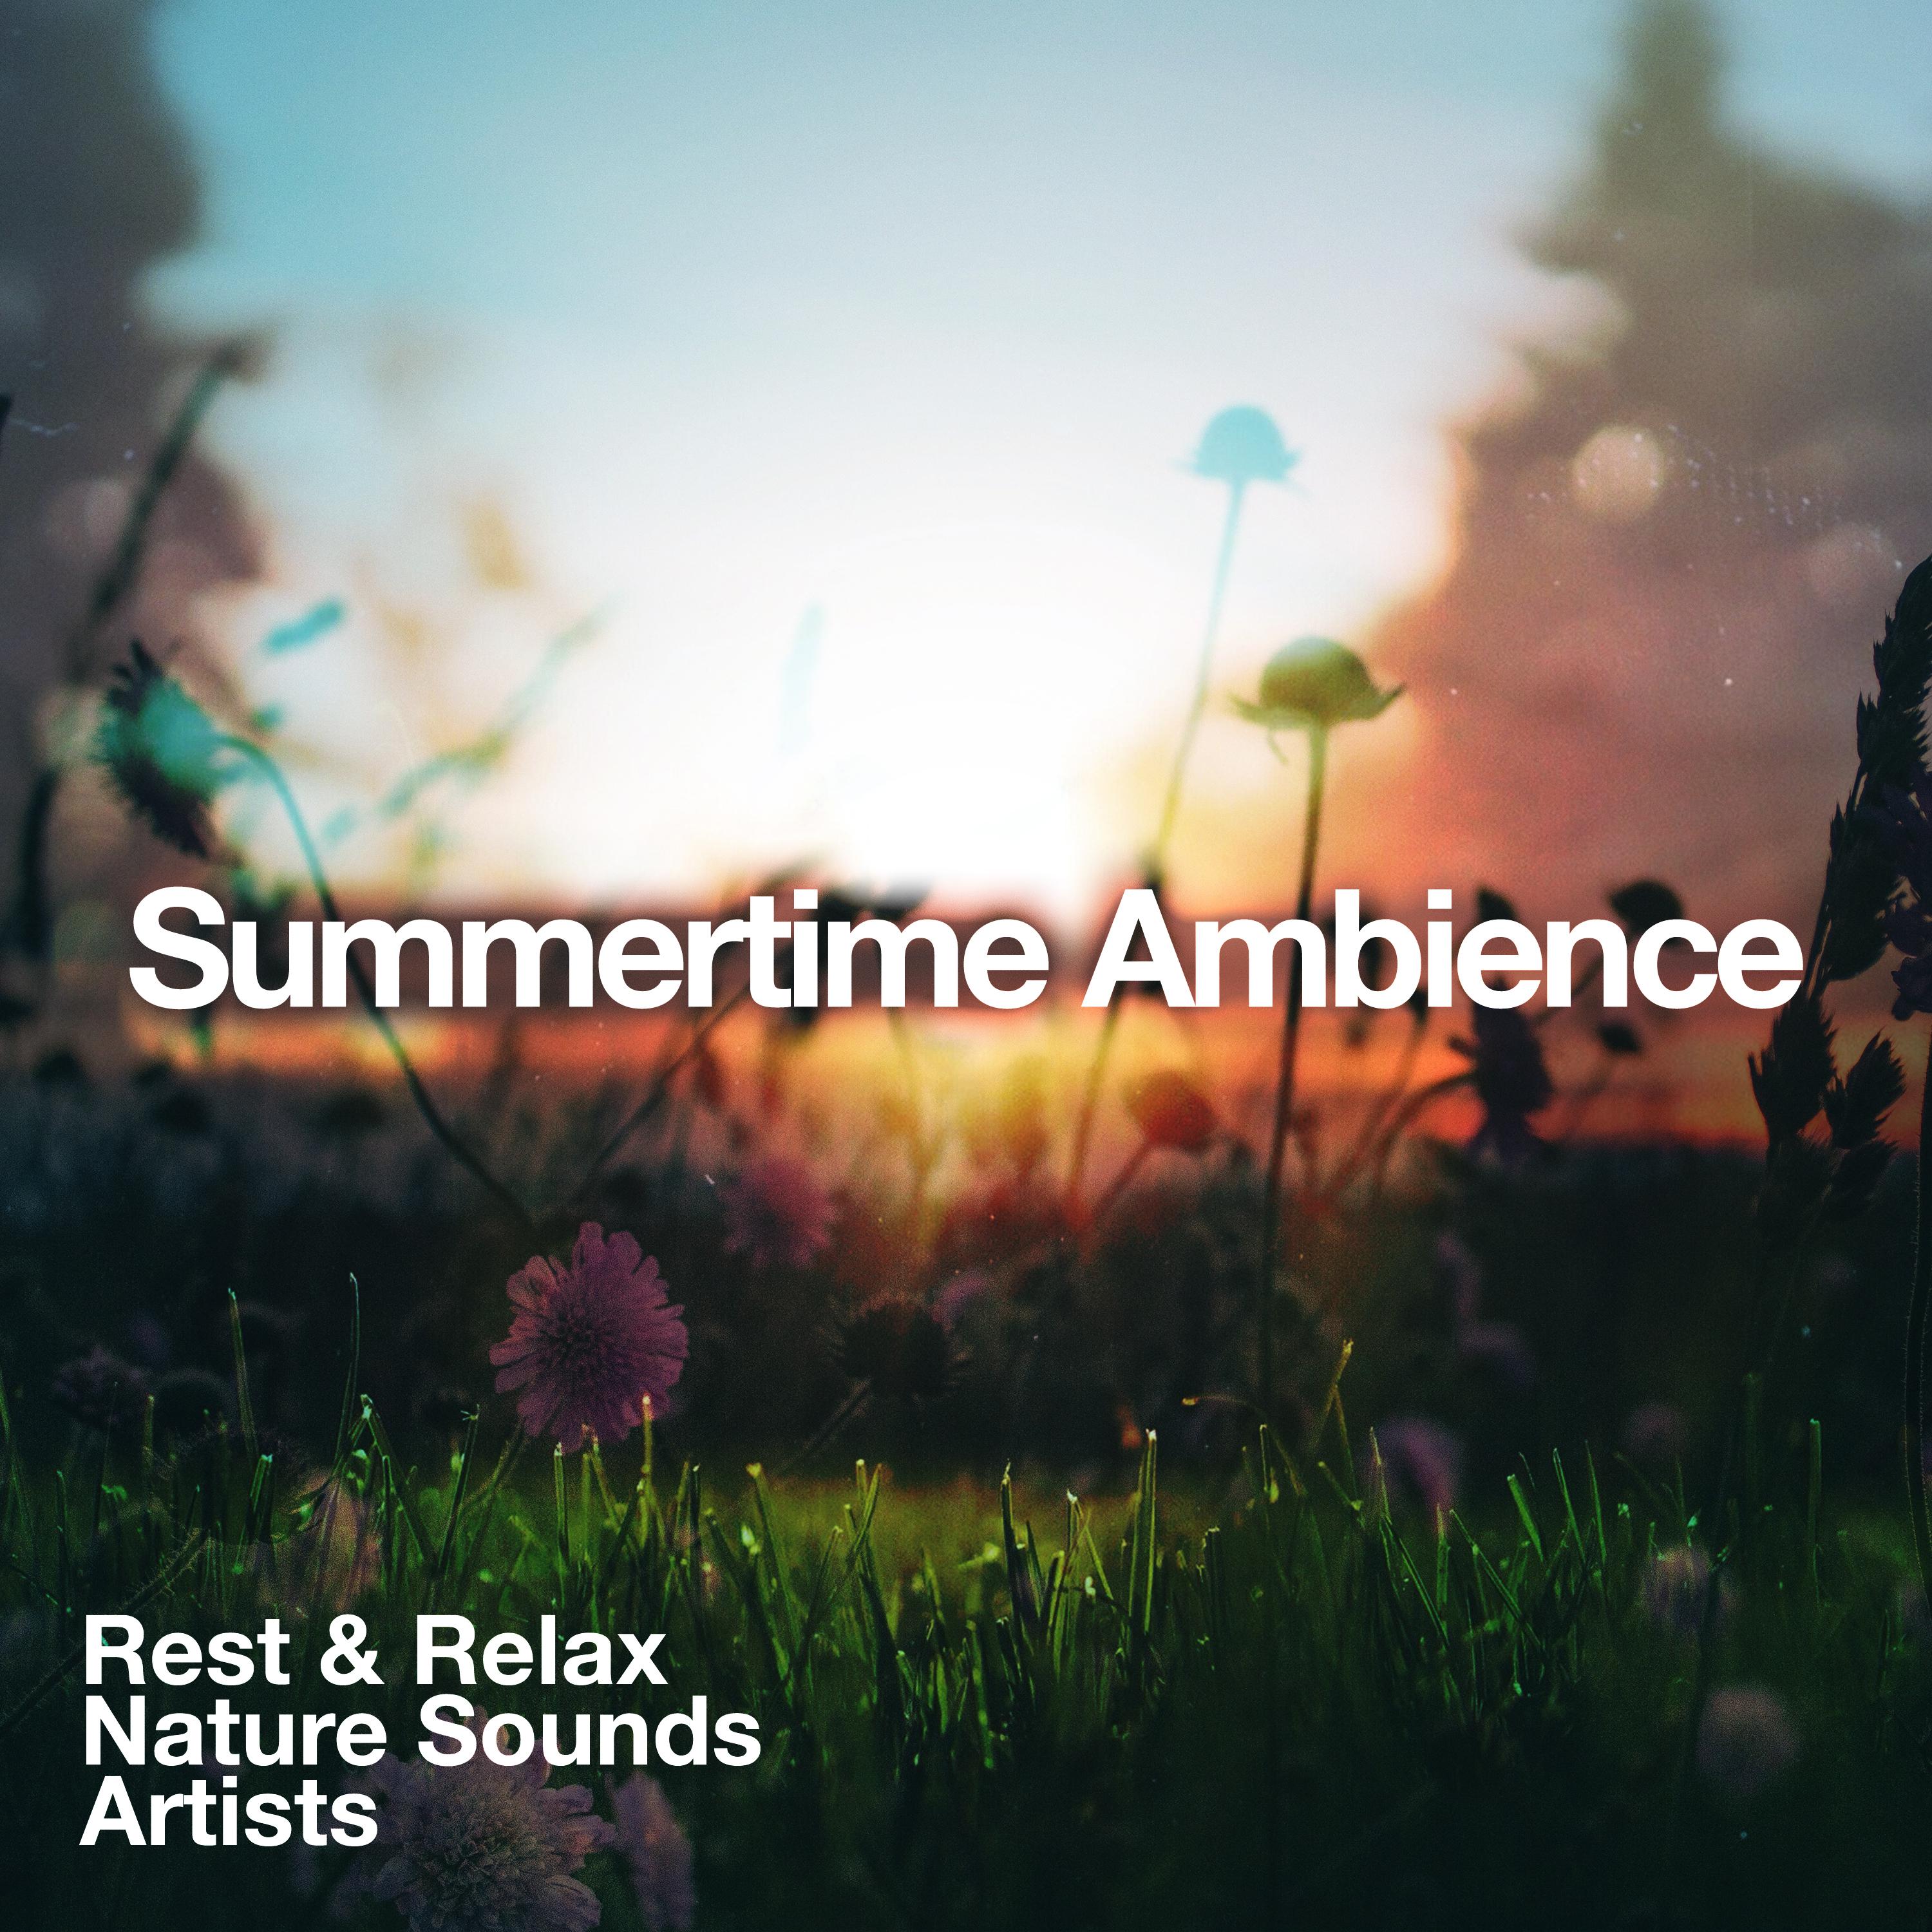 Summertime Ambience